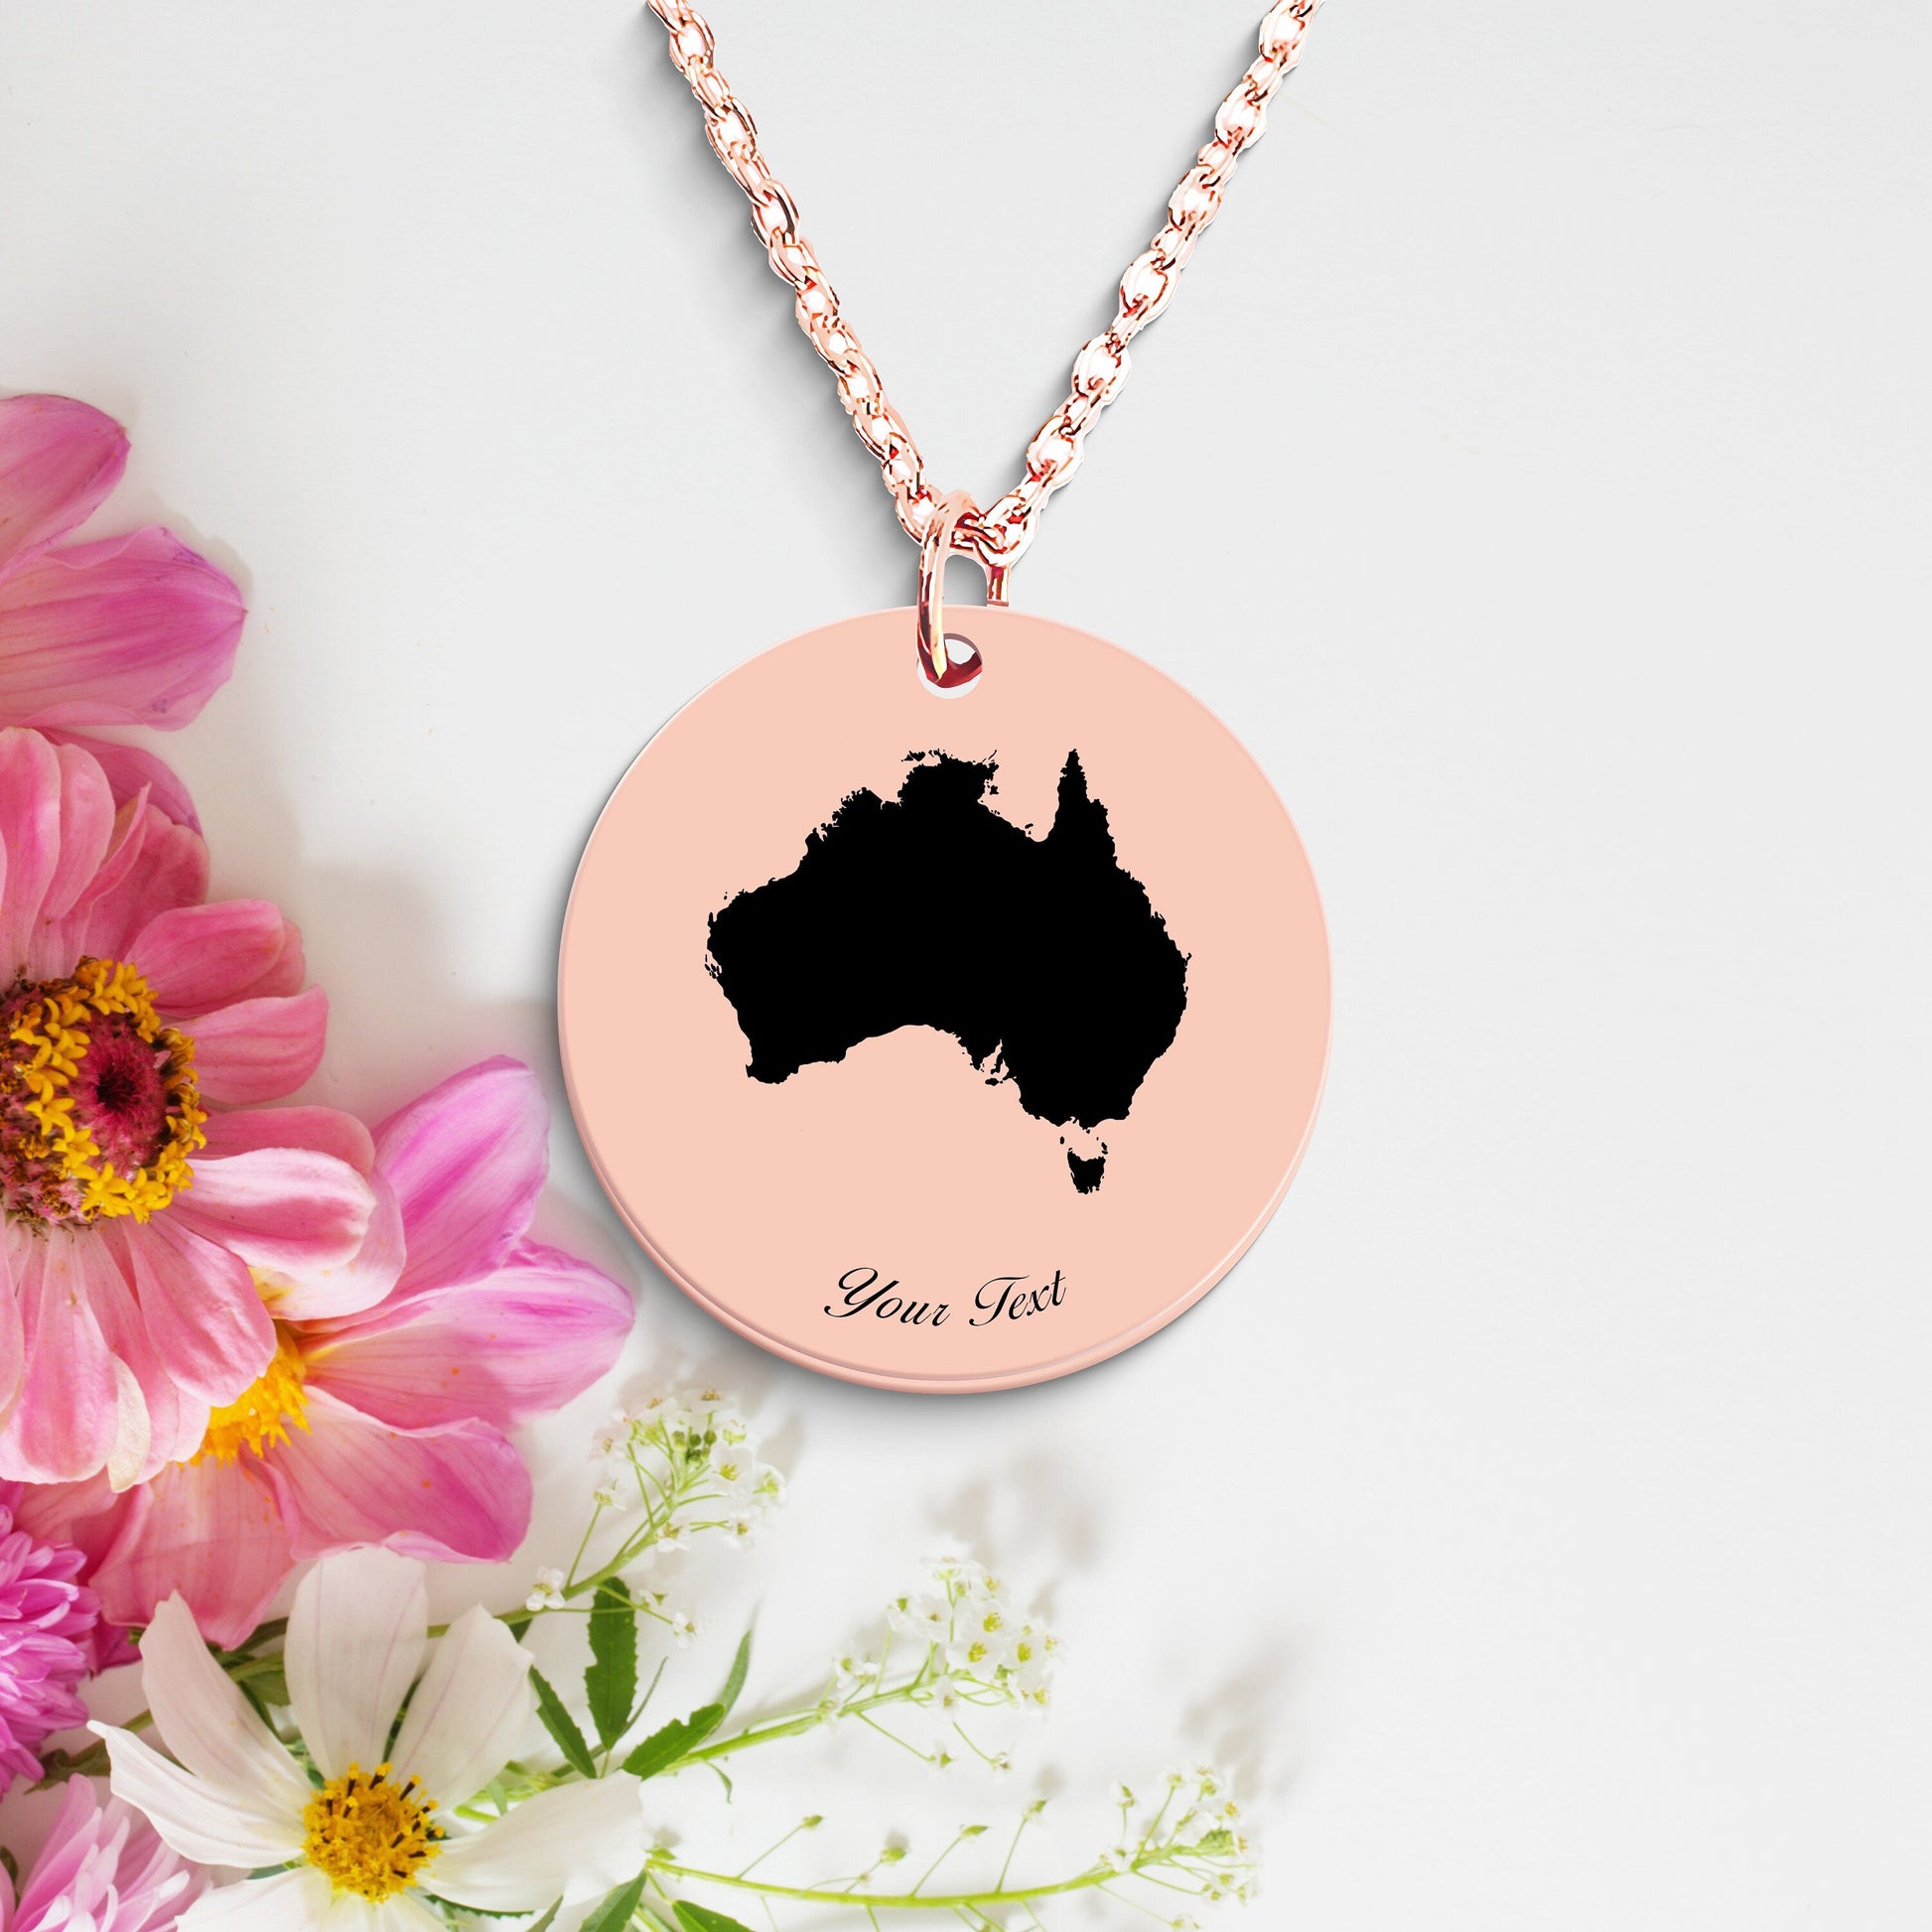 Australia Country Map Necklace, Your Name Necklace, Minimalist Necklace, Personalized Gift, Silver Necklace, Gift For Him Her